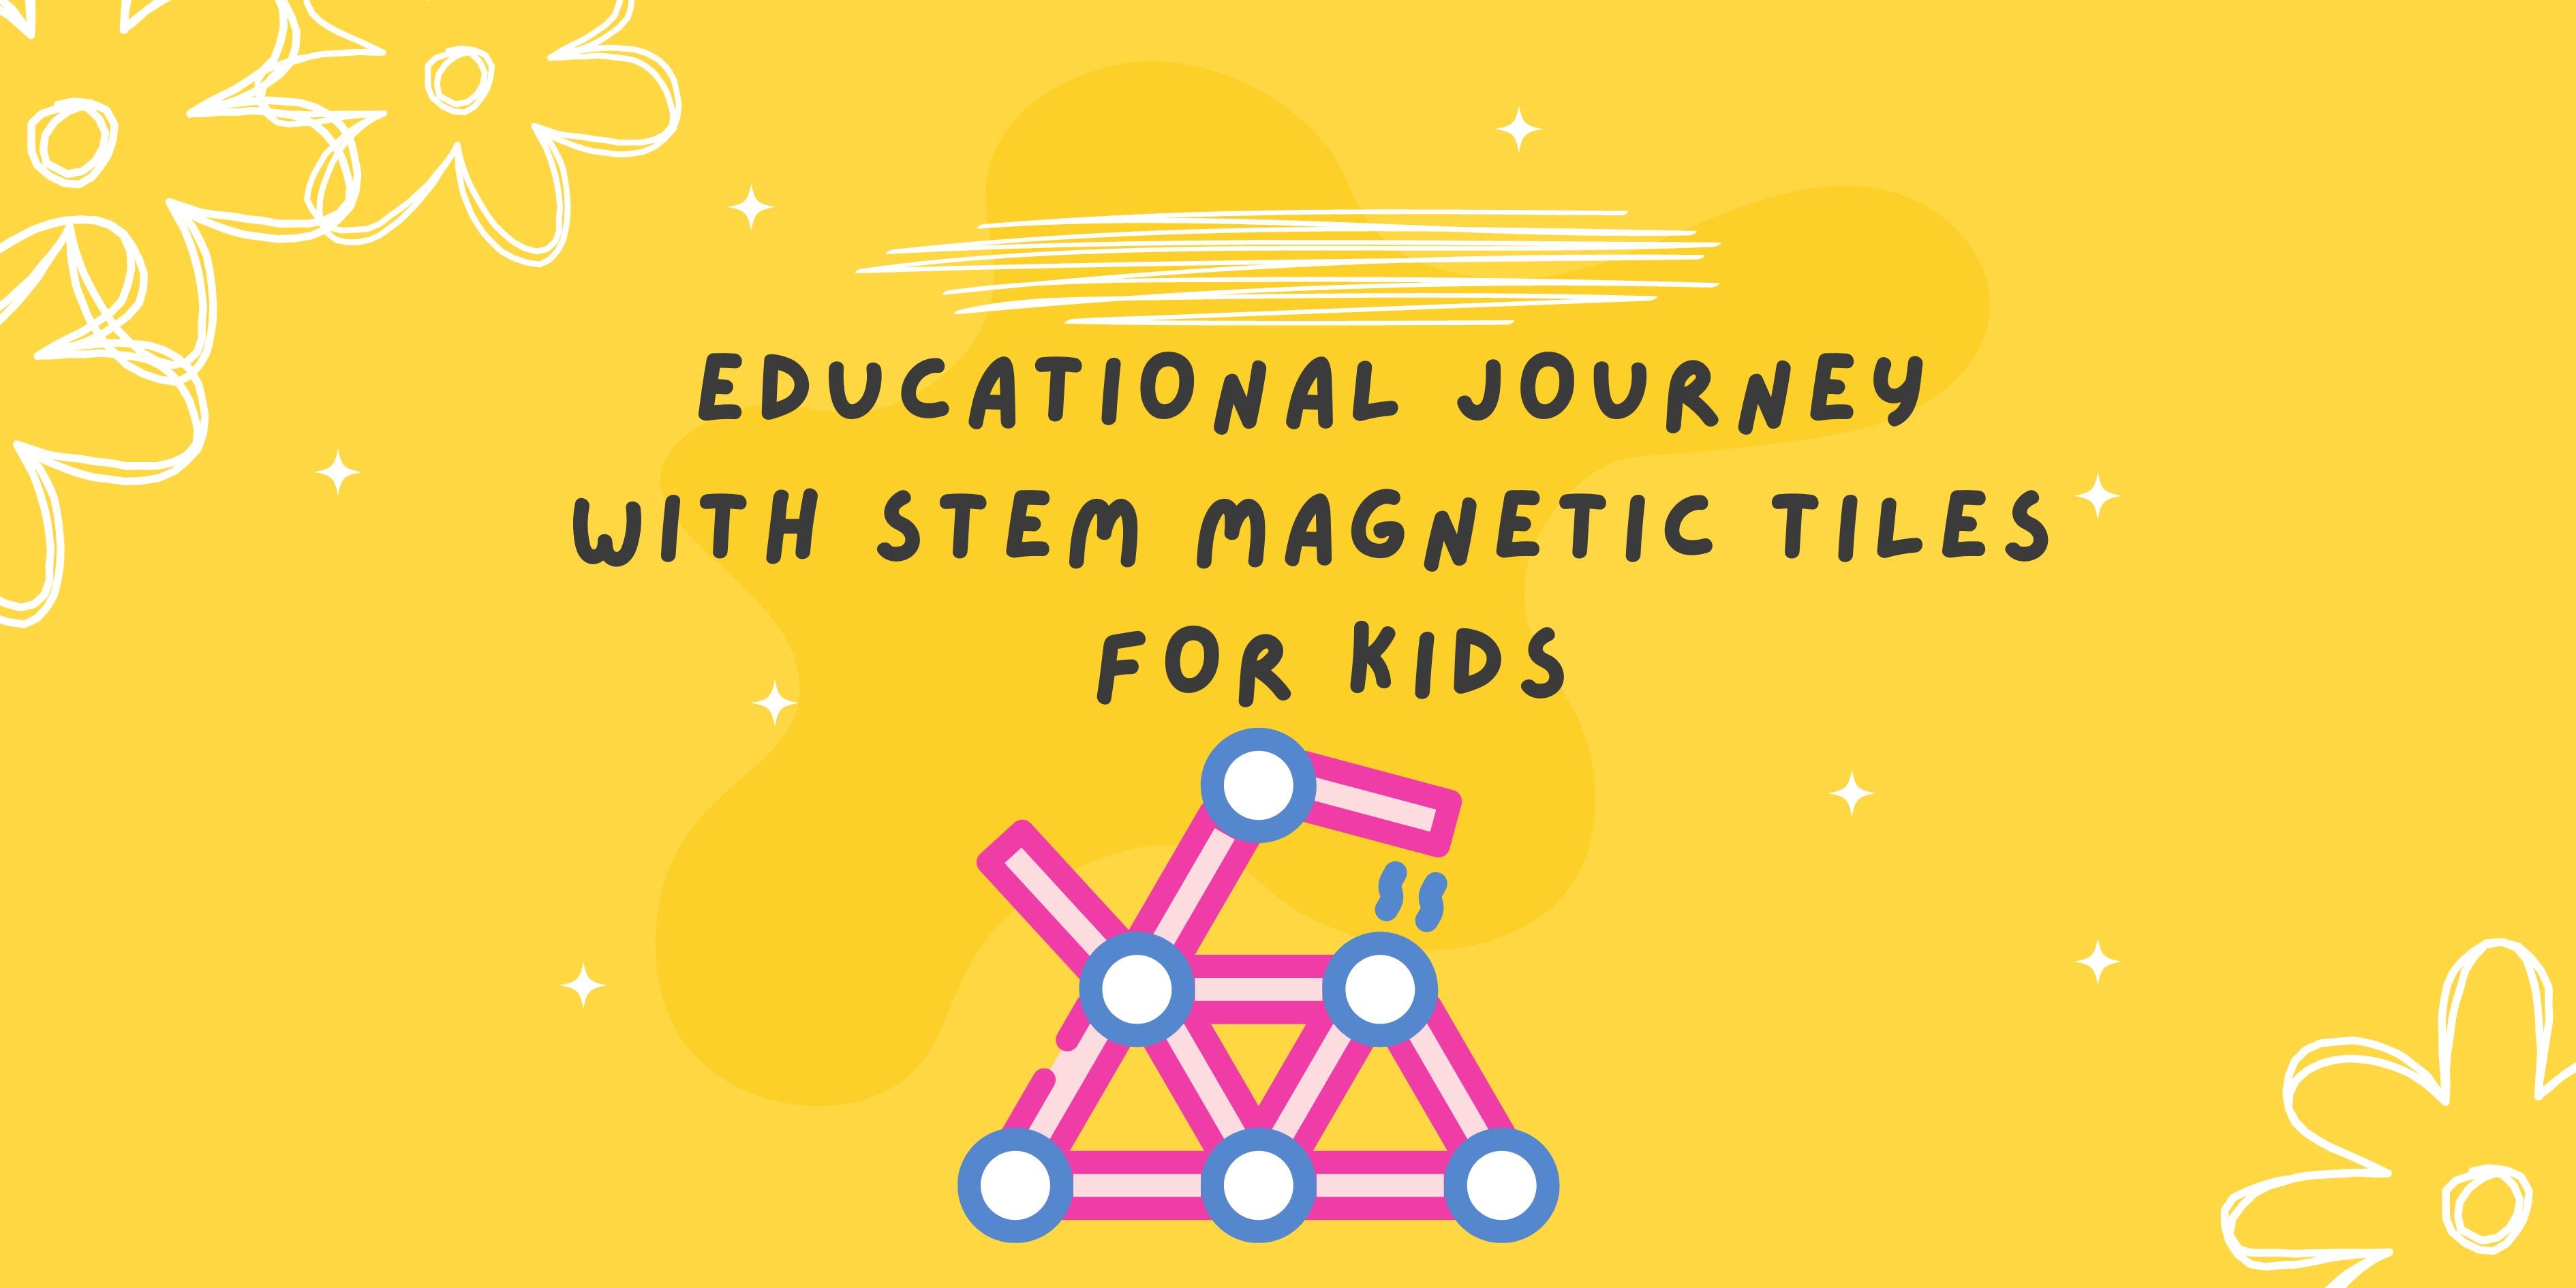 An Engaging and Educational Journey with STEM Magnetic Tiles for Kids